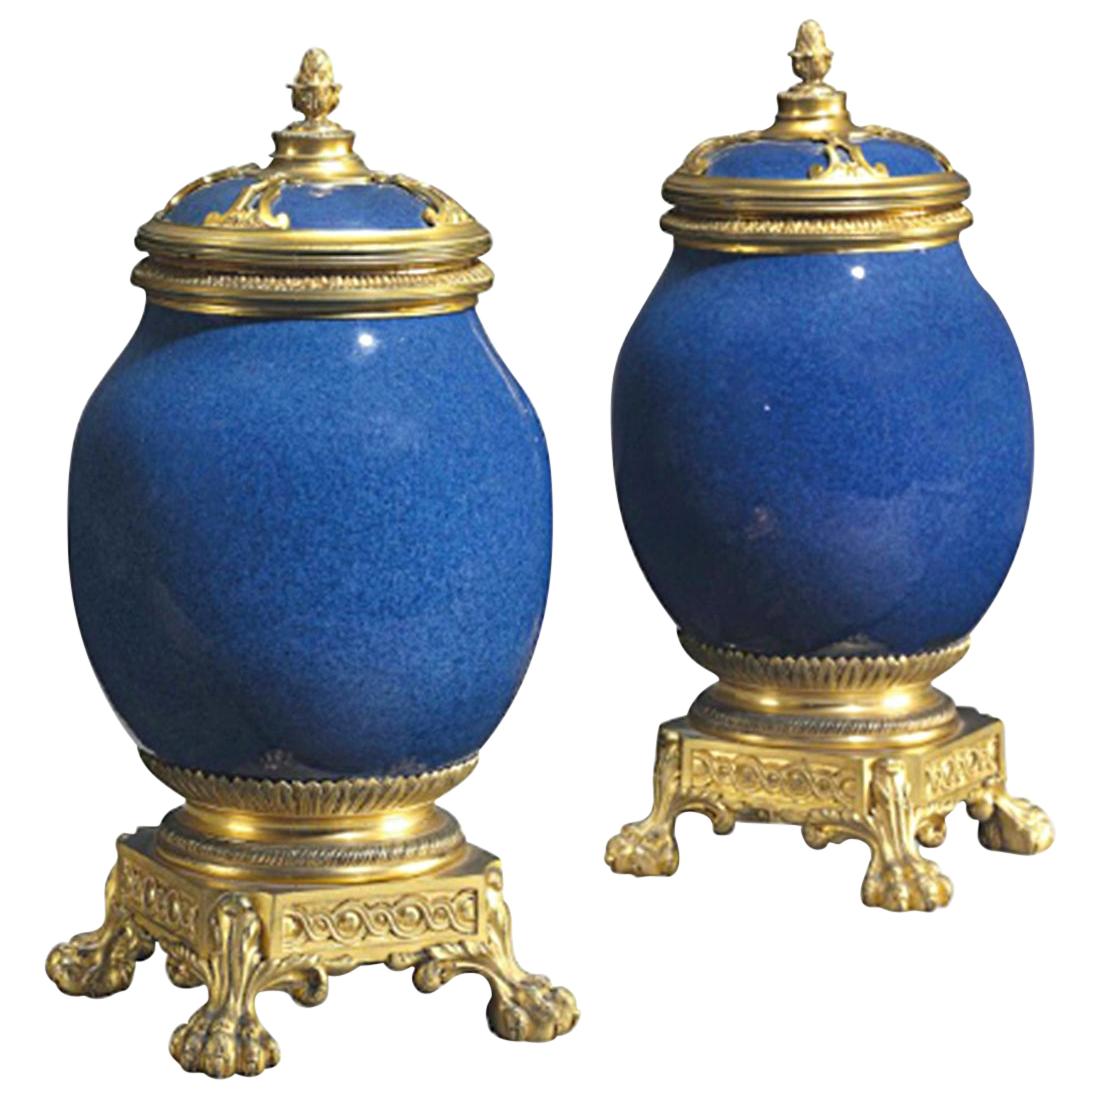 Pair of French Ormolu-Mounted Chinese Porcelain Vases and Covers